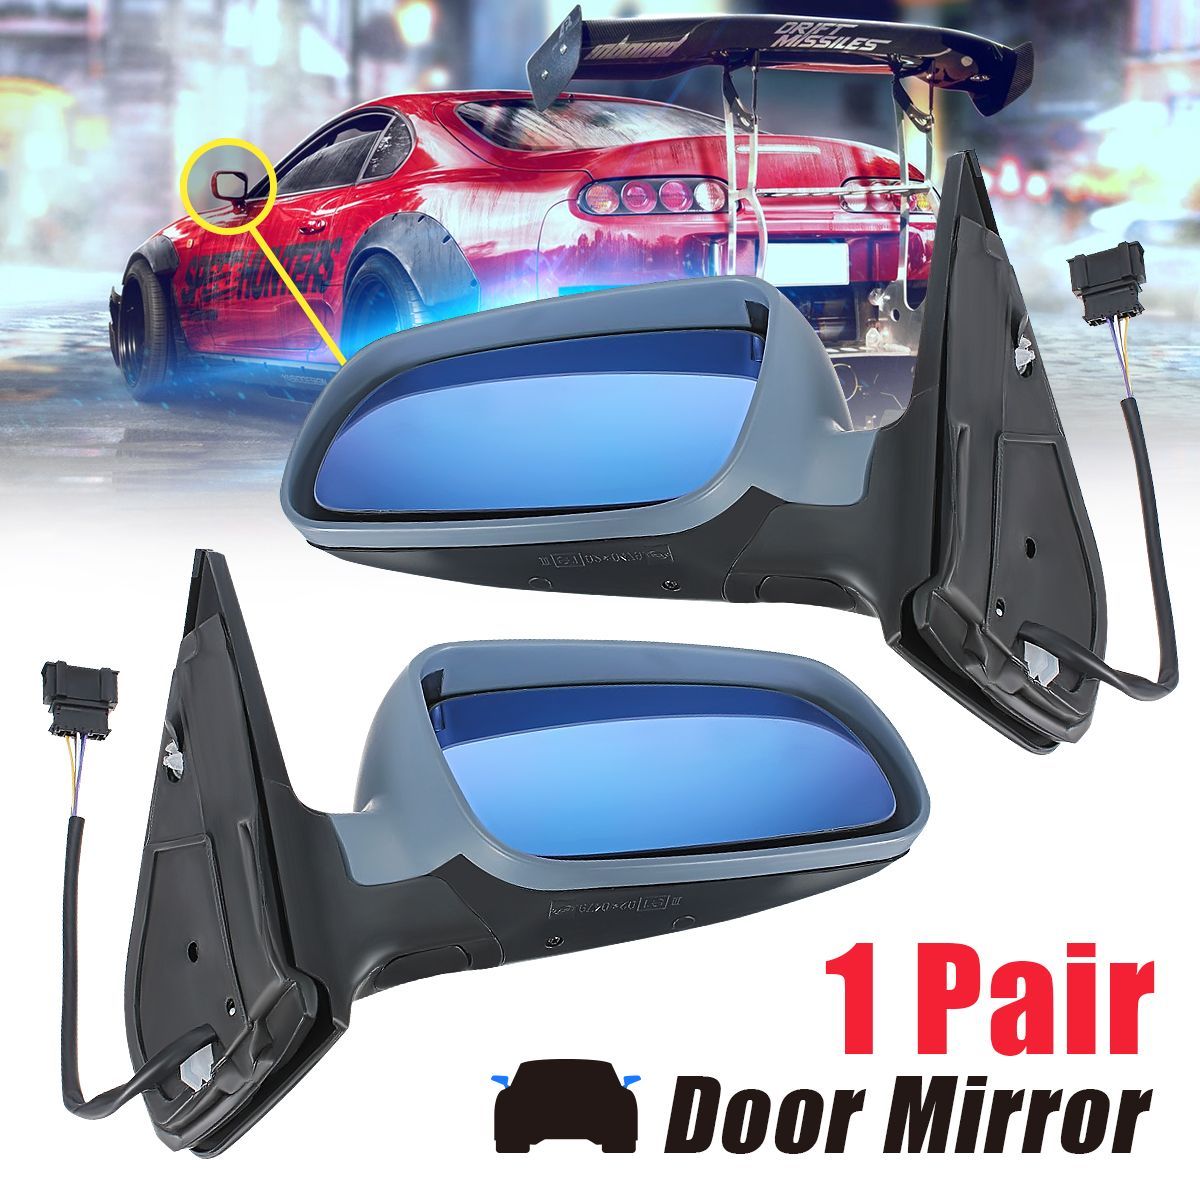 Car-Exterior-Electric-Wing-Door-Mirror-Left-Right-Side-For-VW-Bora-Golf-MK4-1997-2005-82675